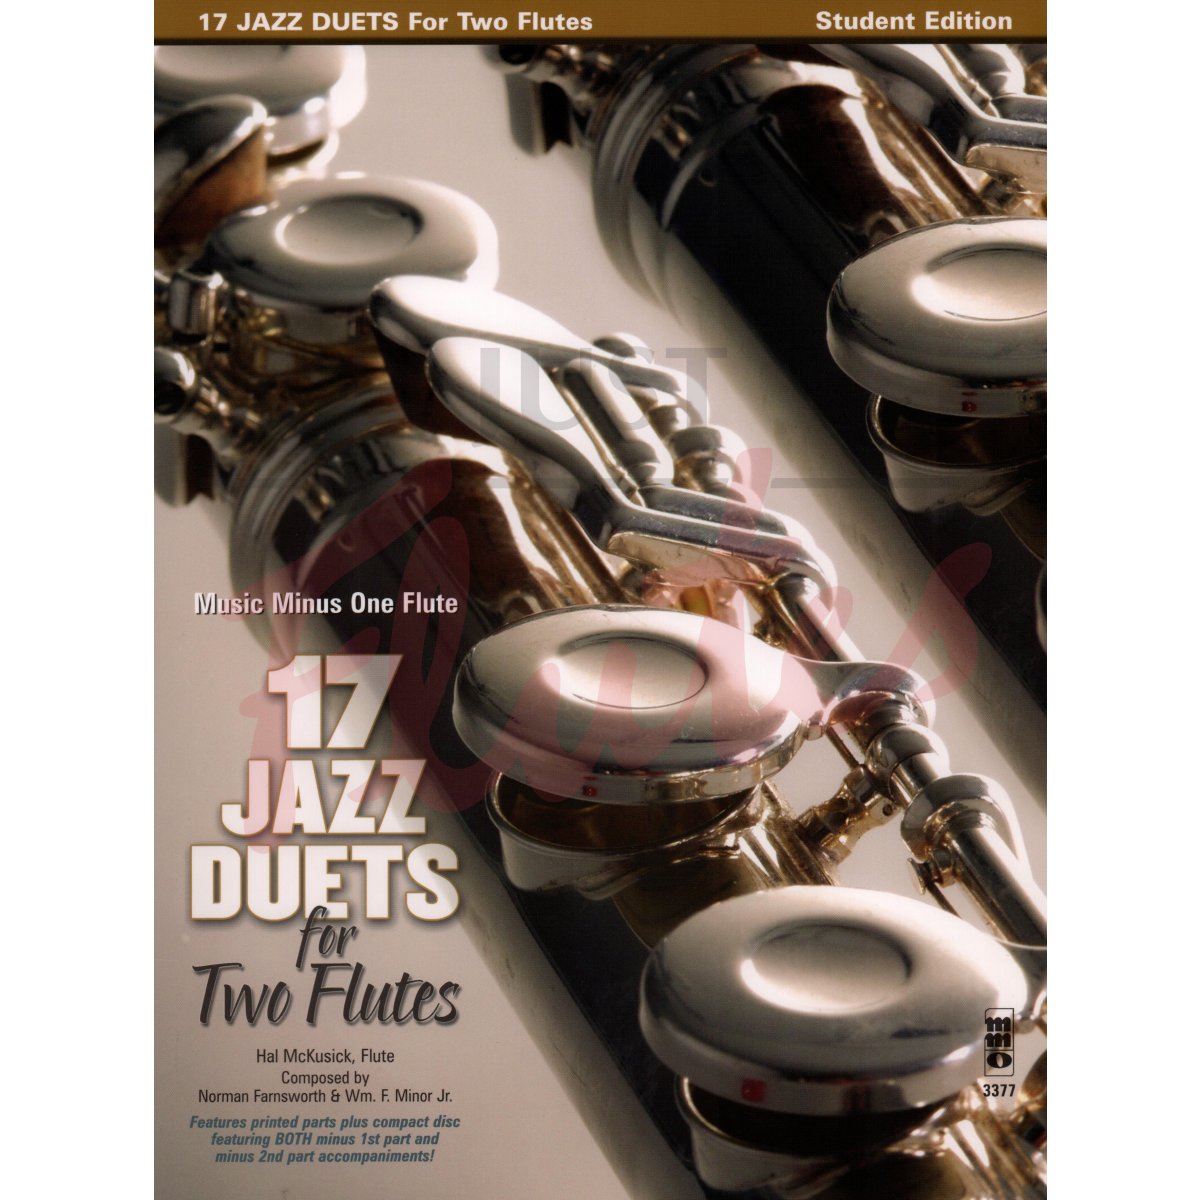 17 Jazz Duets for Two Flutes